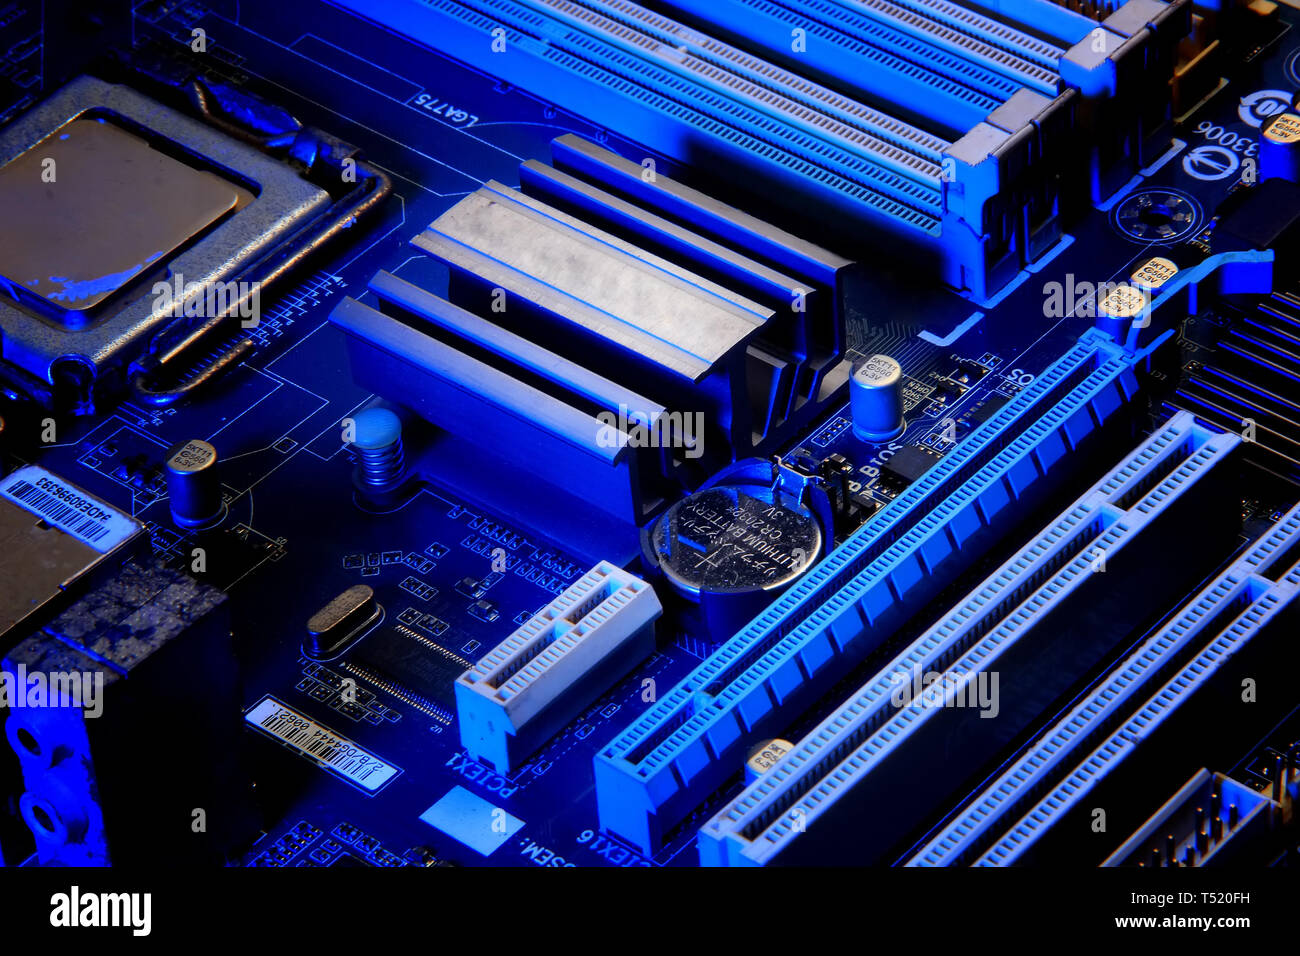 computer motherboard hardware Stock Photo